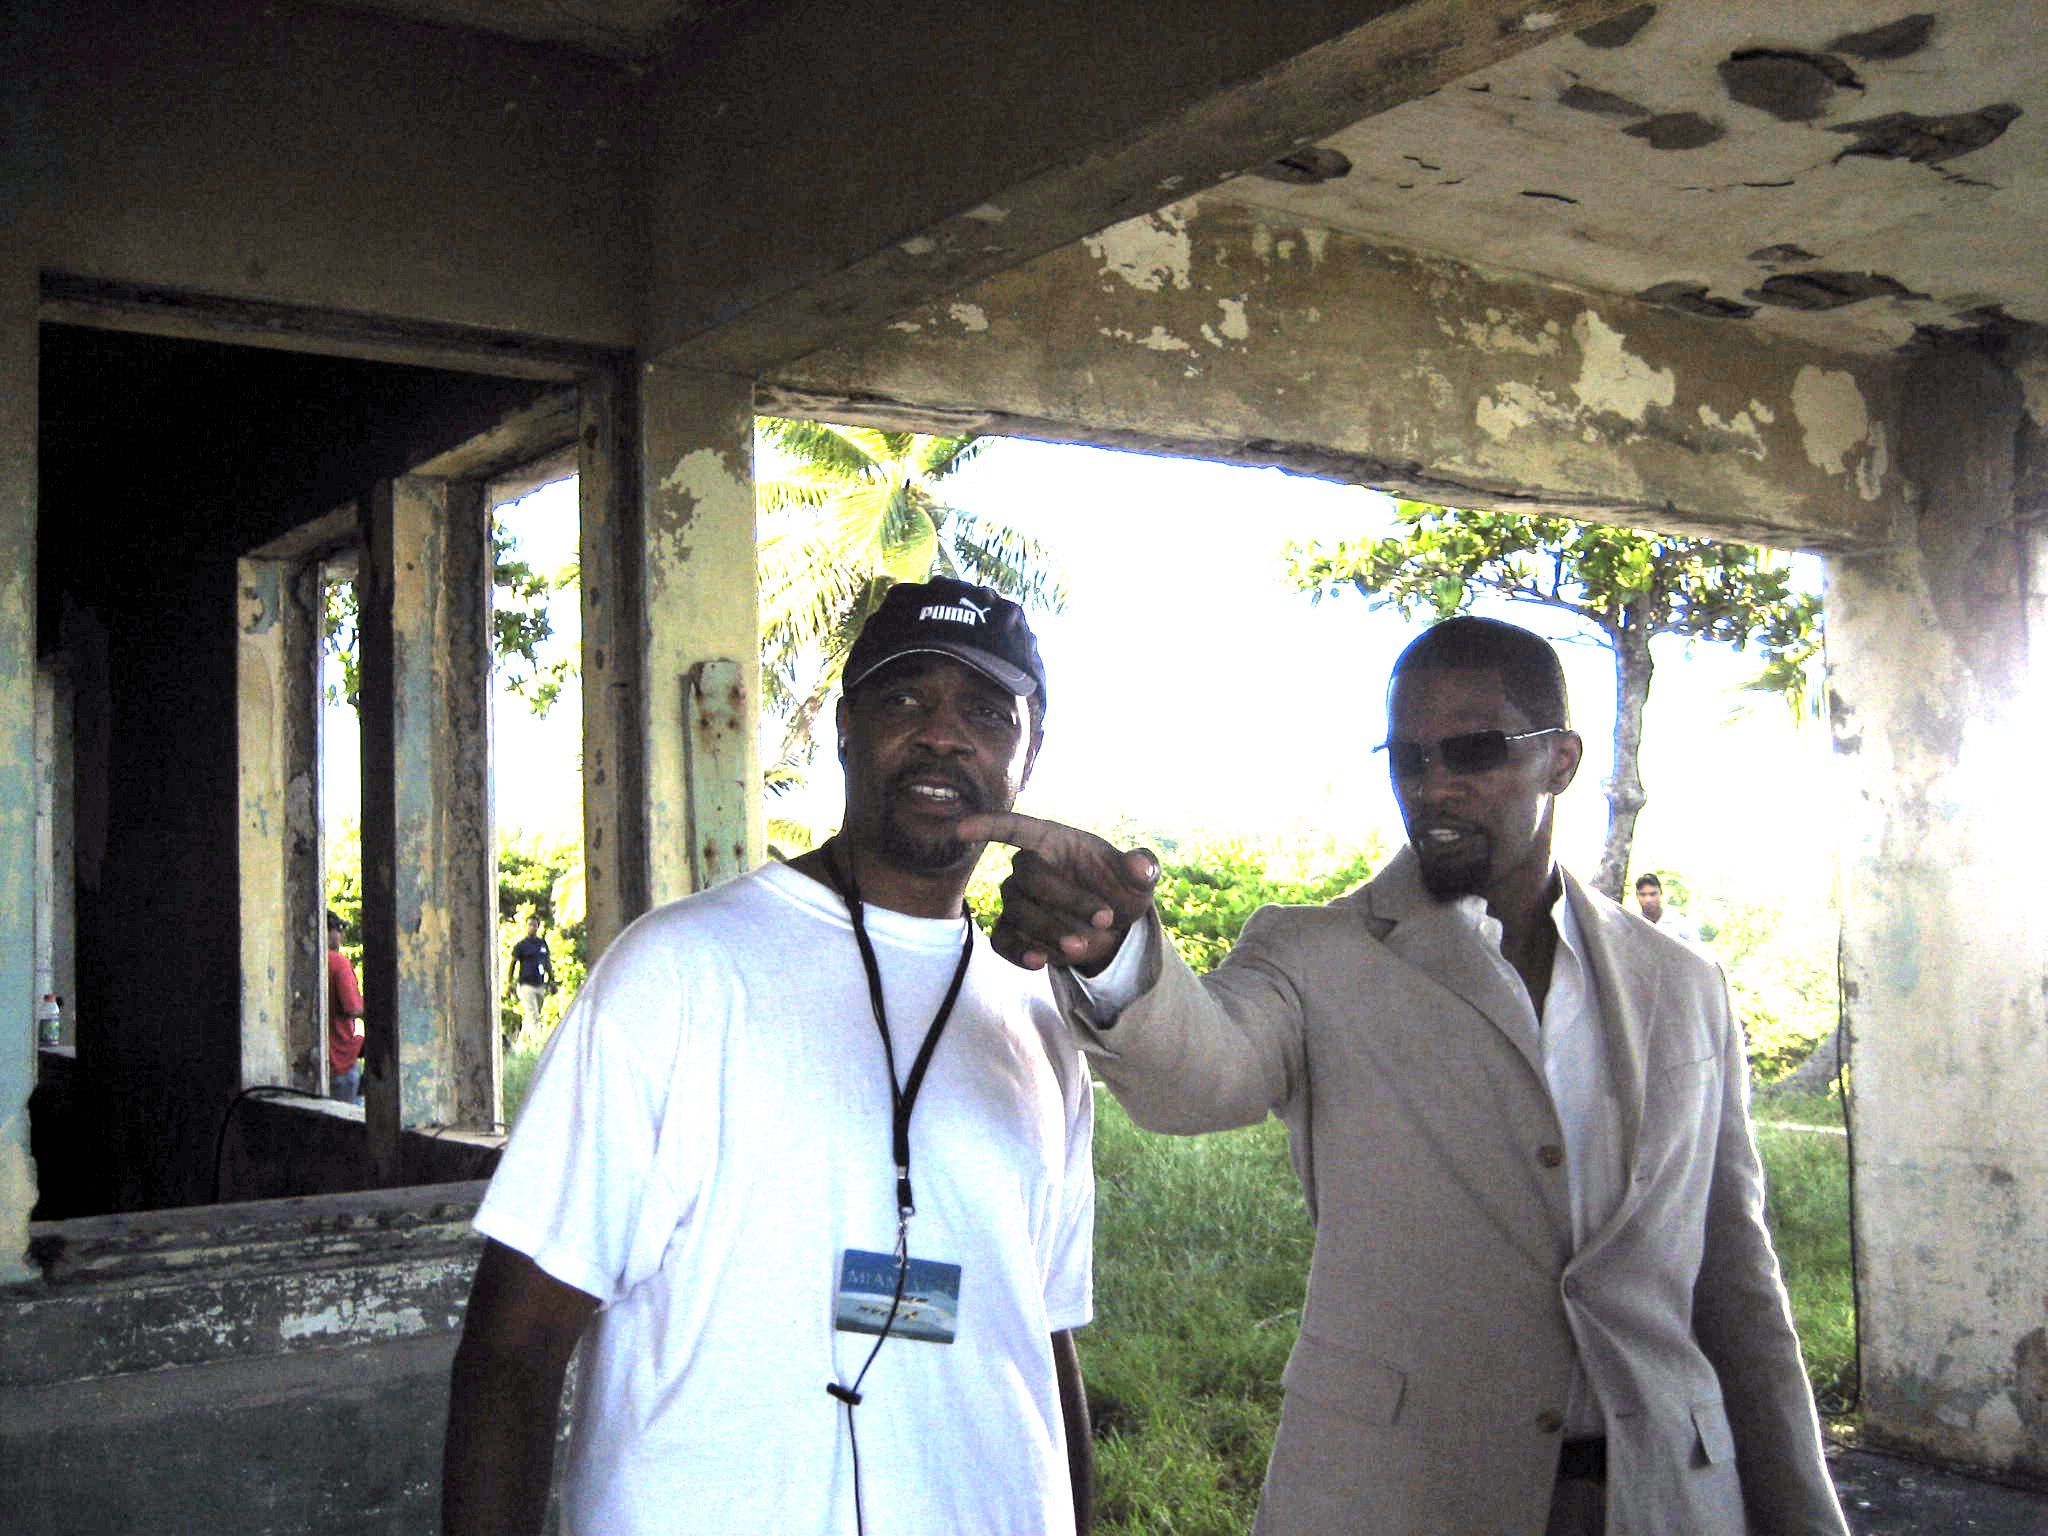 Ron Lang and Jamie Foxx on Miami Vice Production in the Dominican Republic